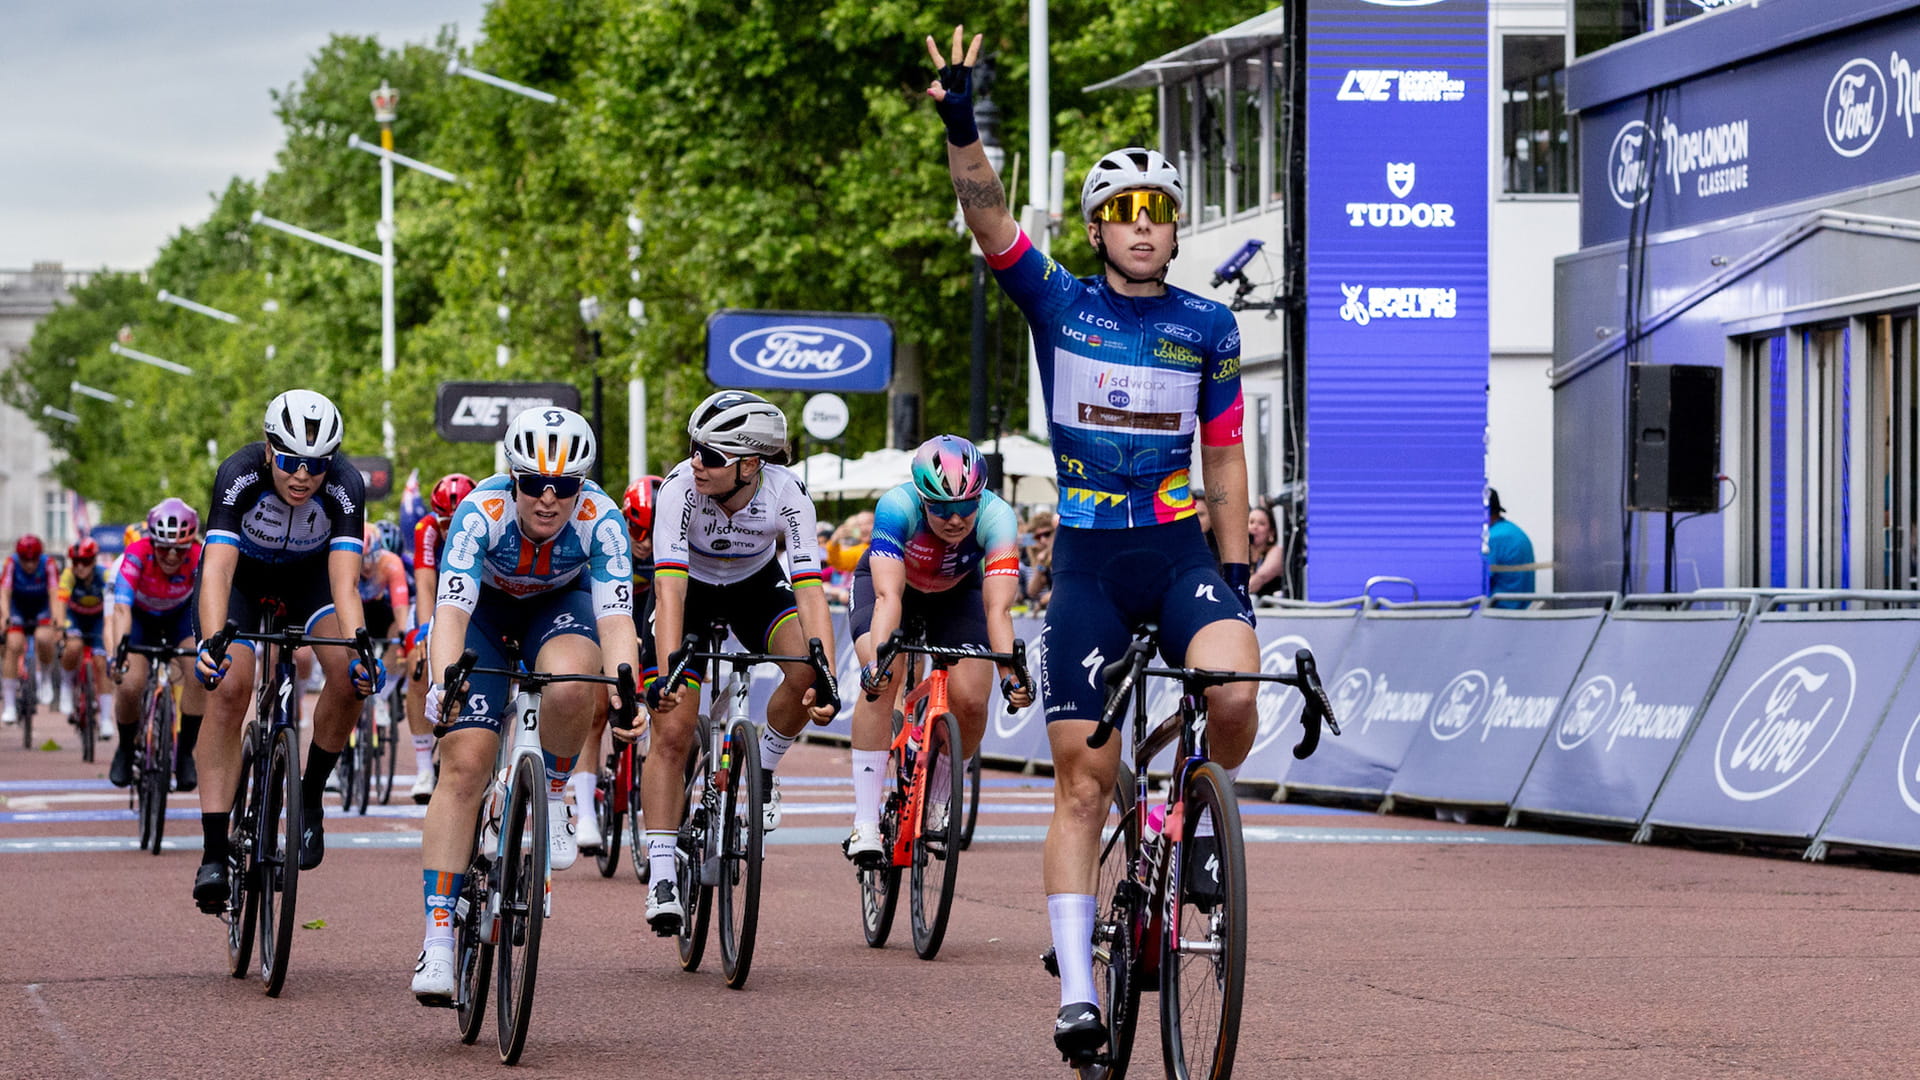 Lorena Wiebes (NED) of Team SD Worx Protime (NED) celebrates after crossing the finish line after winning Stage Three of the Ford RideLondon Classique